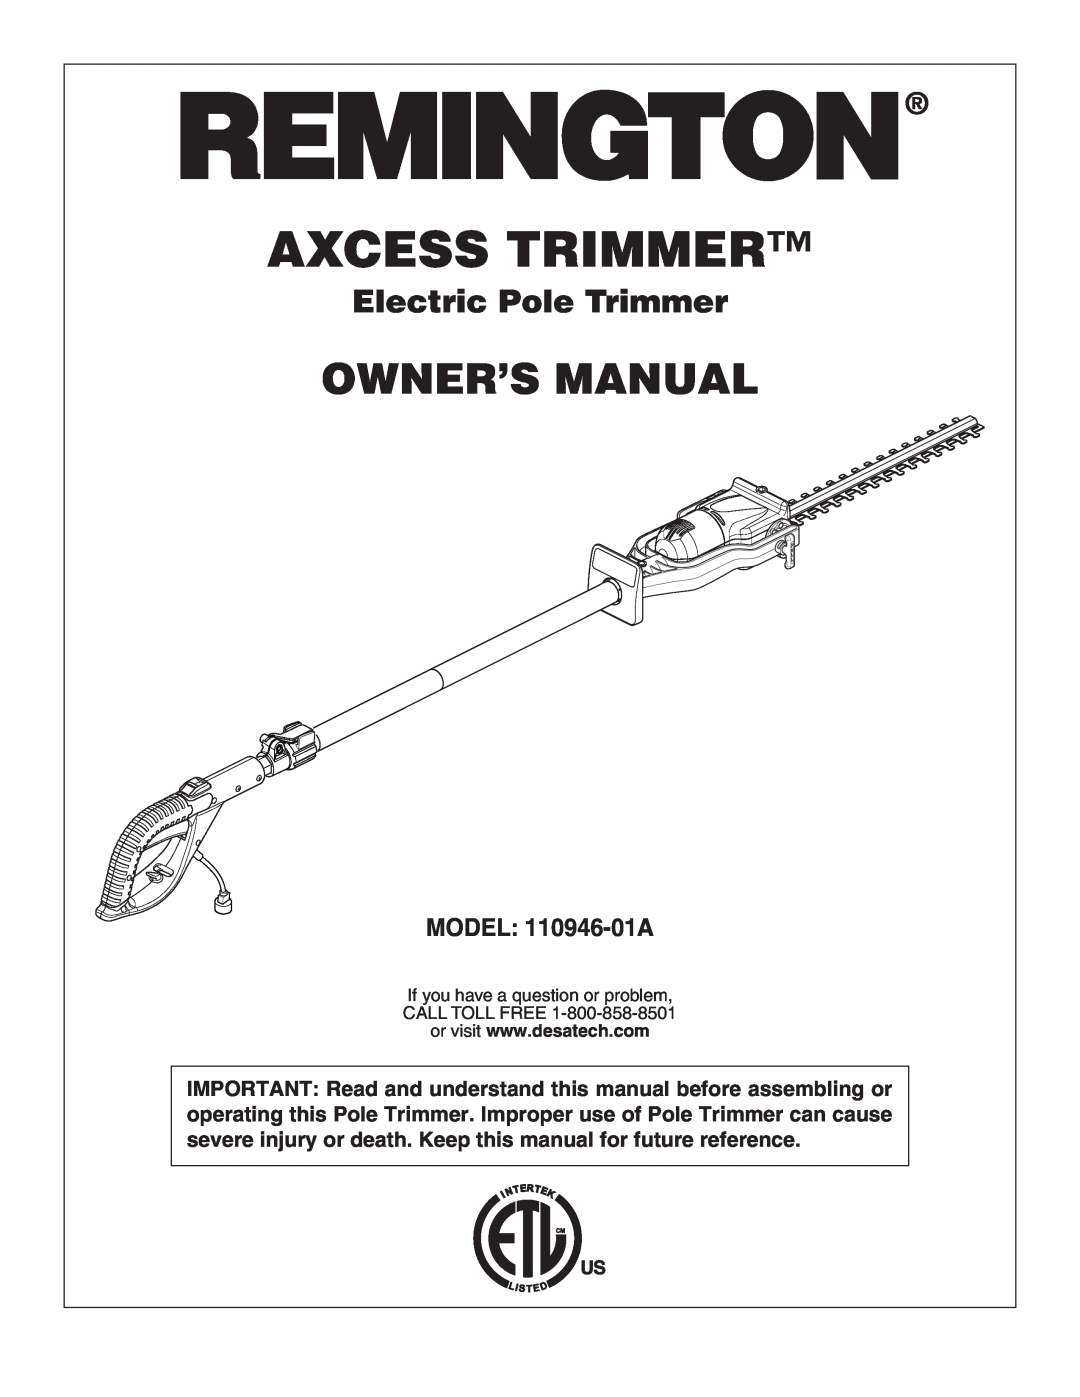 Desa owner manual Axcess Trimmer, Electric Pole Trimmer, MODEL 110946-01A 